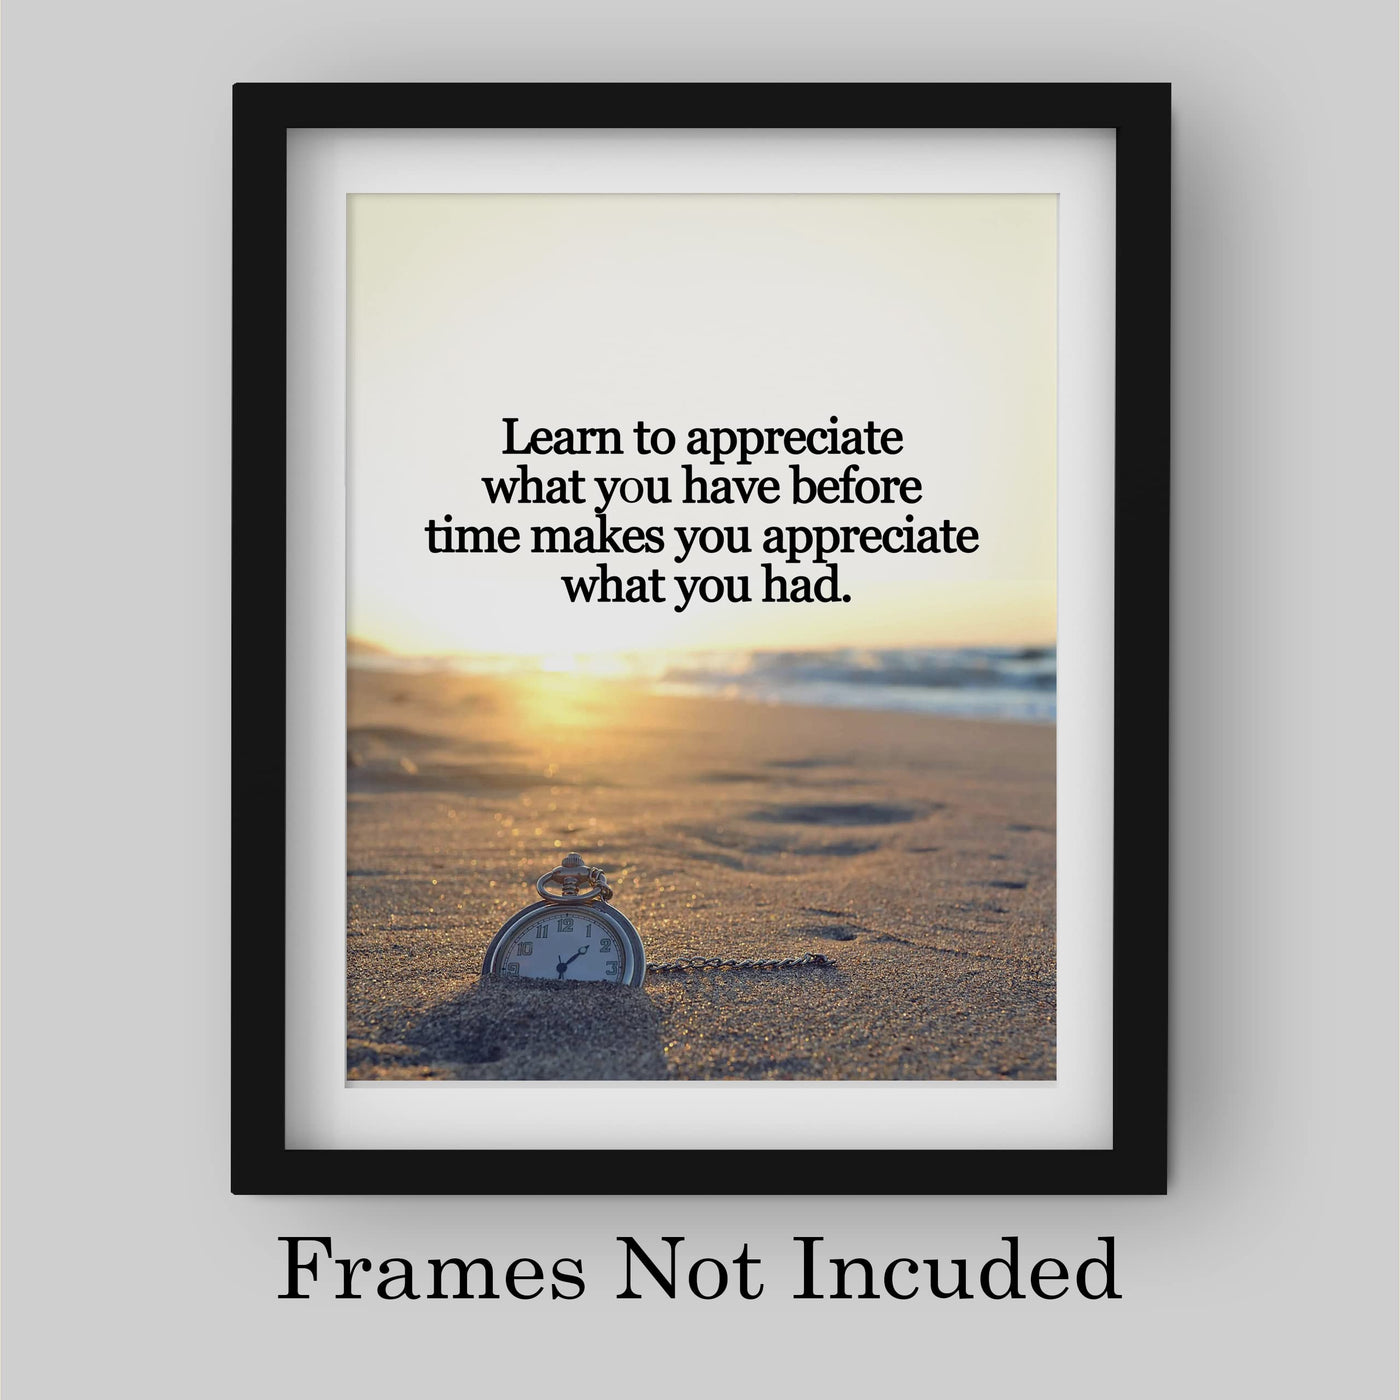 Learn to Appreciate What You Have Inspirational Beach Wall Decor -8x10" Motivational Quotes Art Print w/Pocket Watch in Sand Image-Ready to Frame. Home-Office-School-Ocean Theme Decor. Great Gift!